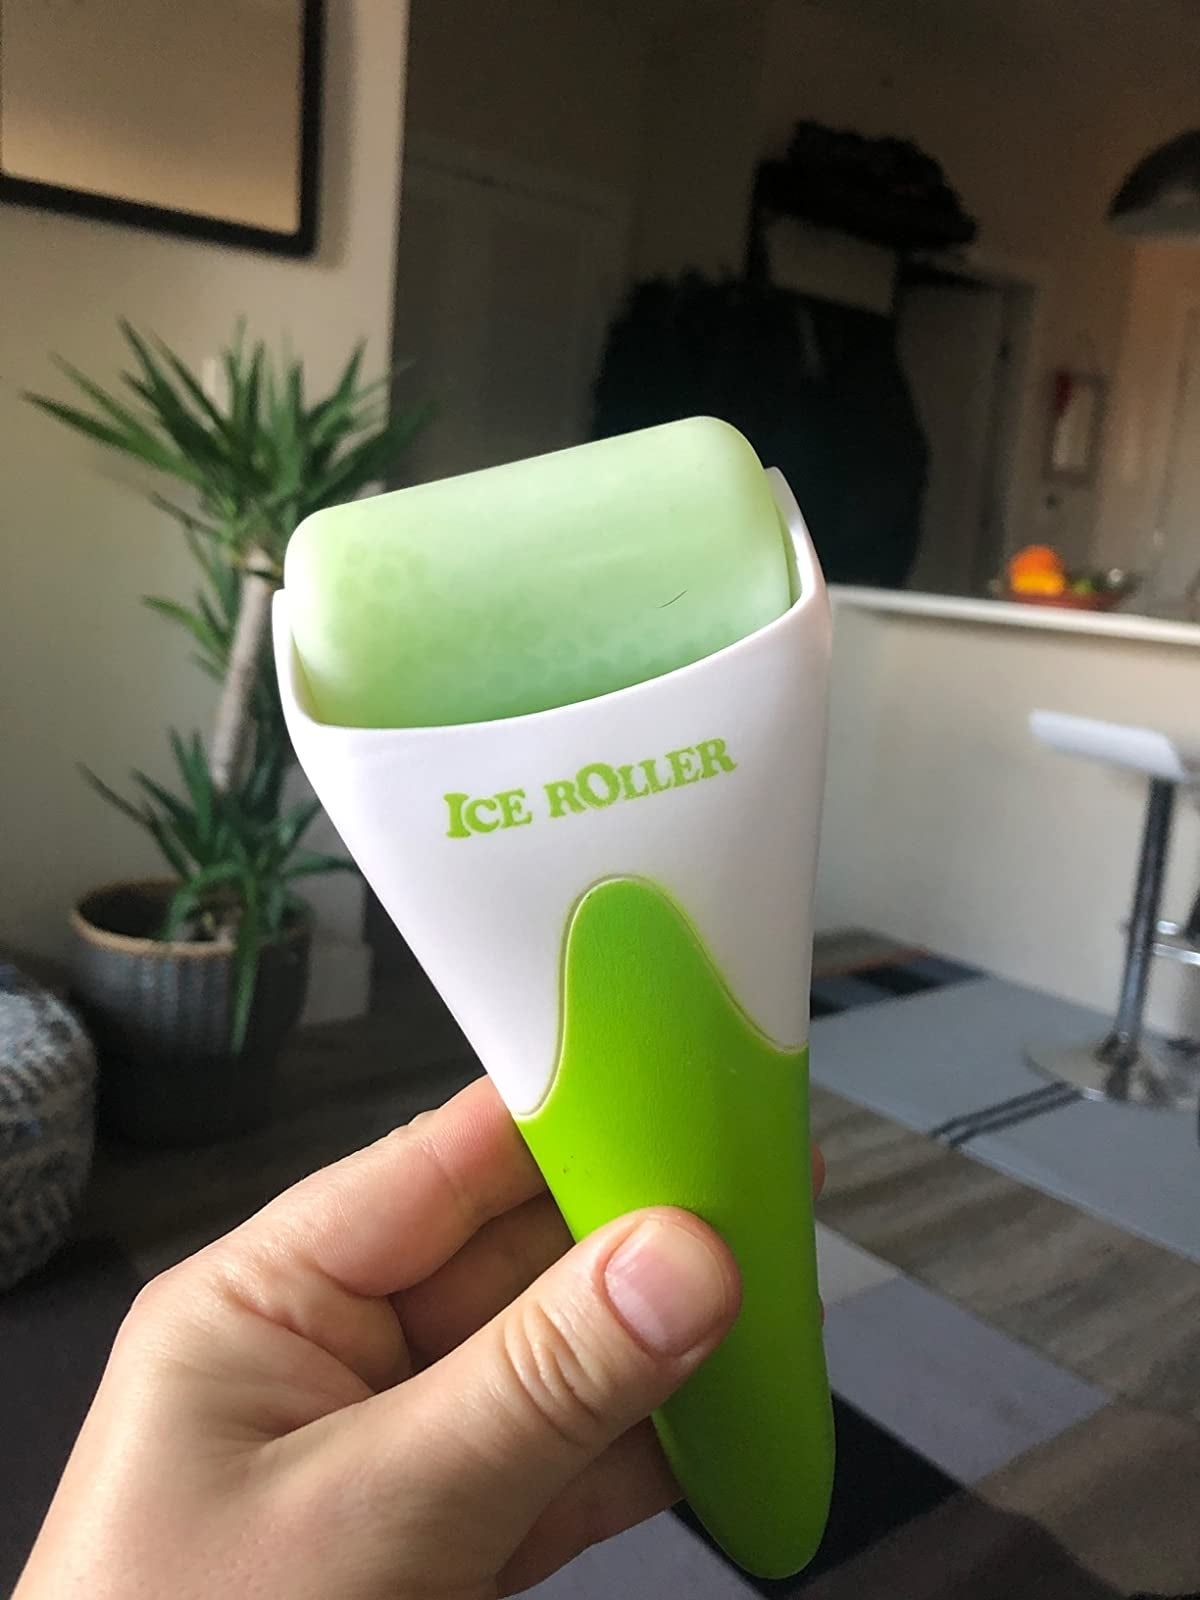 Hand holding an ice roller skincare tool, with indoor background